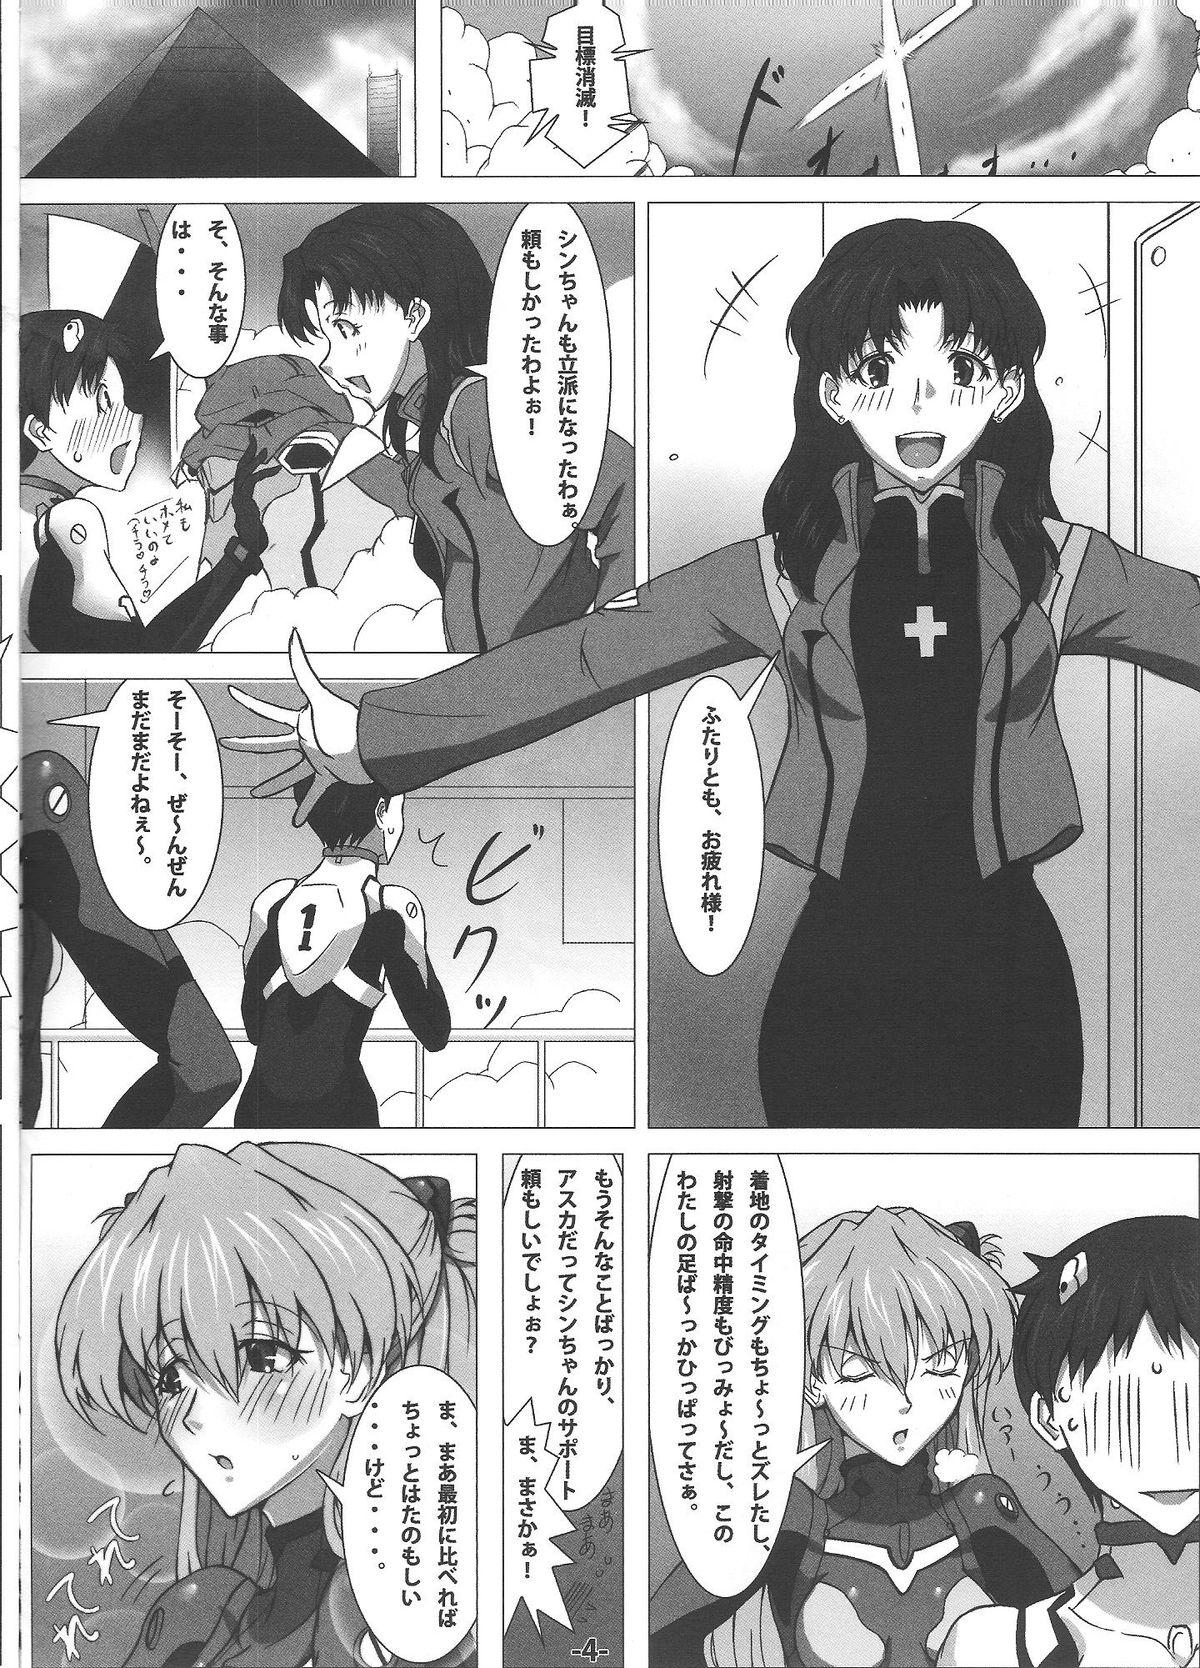 Asia Synchro Rate 200% !! - Neon genesis evangelion Soloboy - Page 5